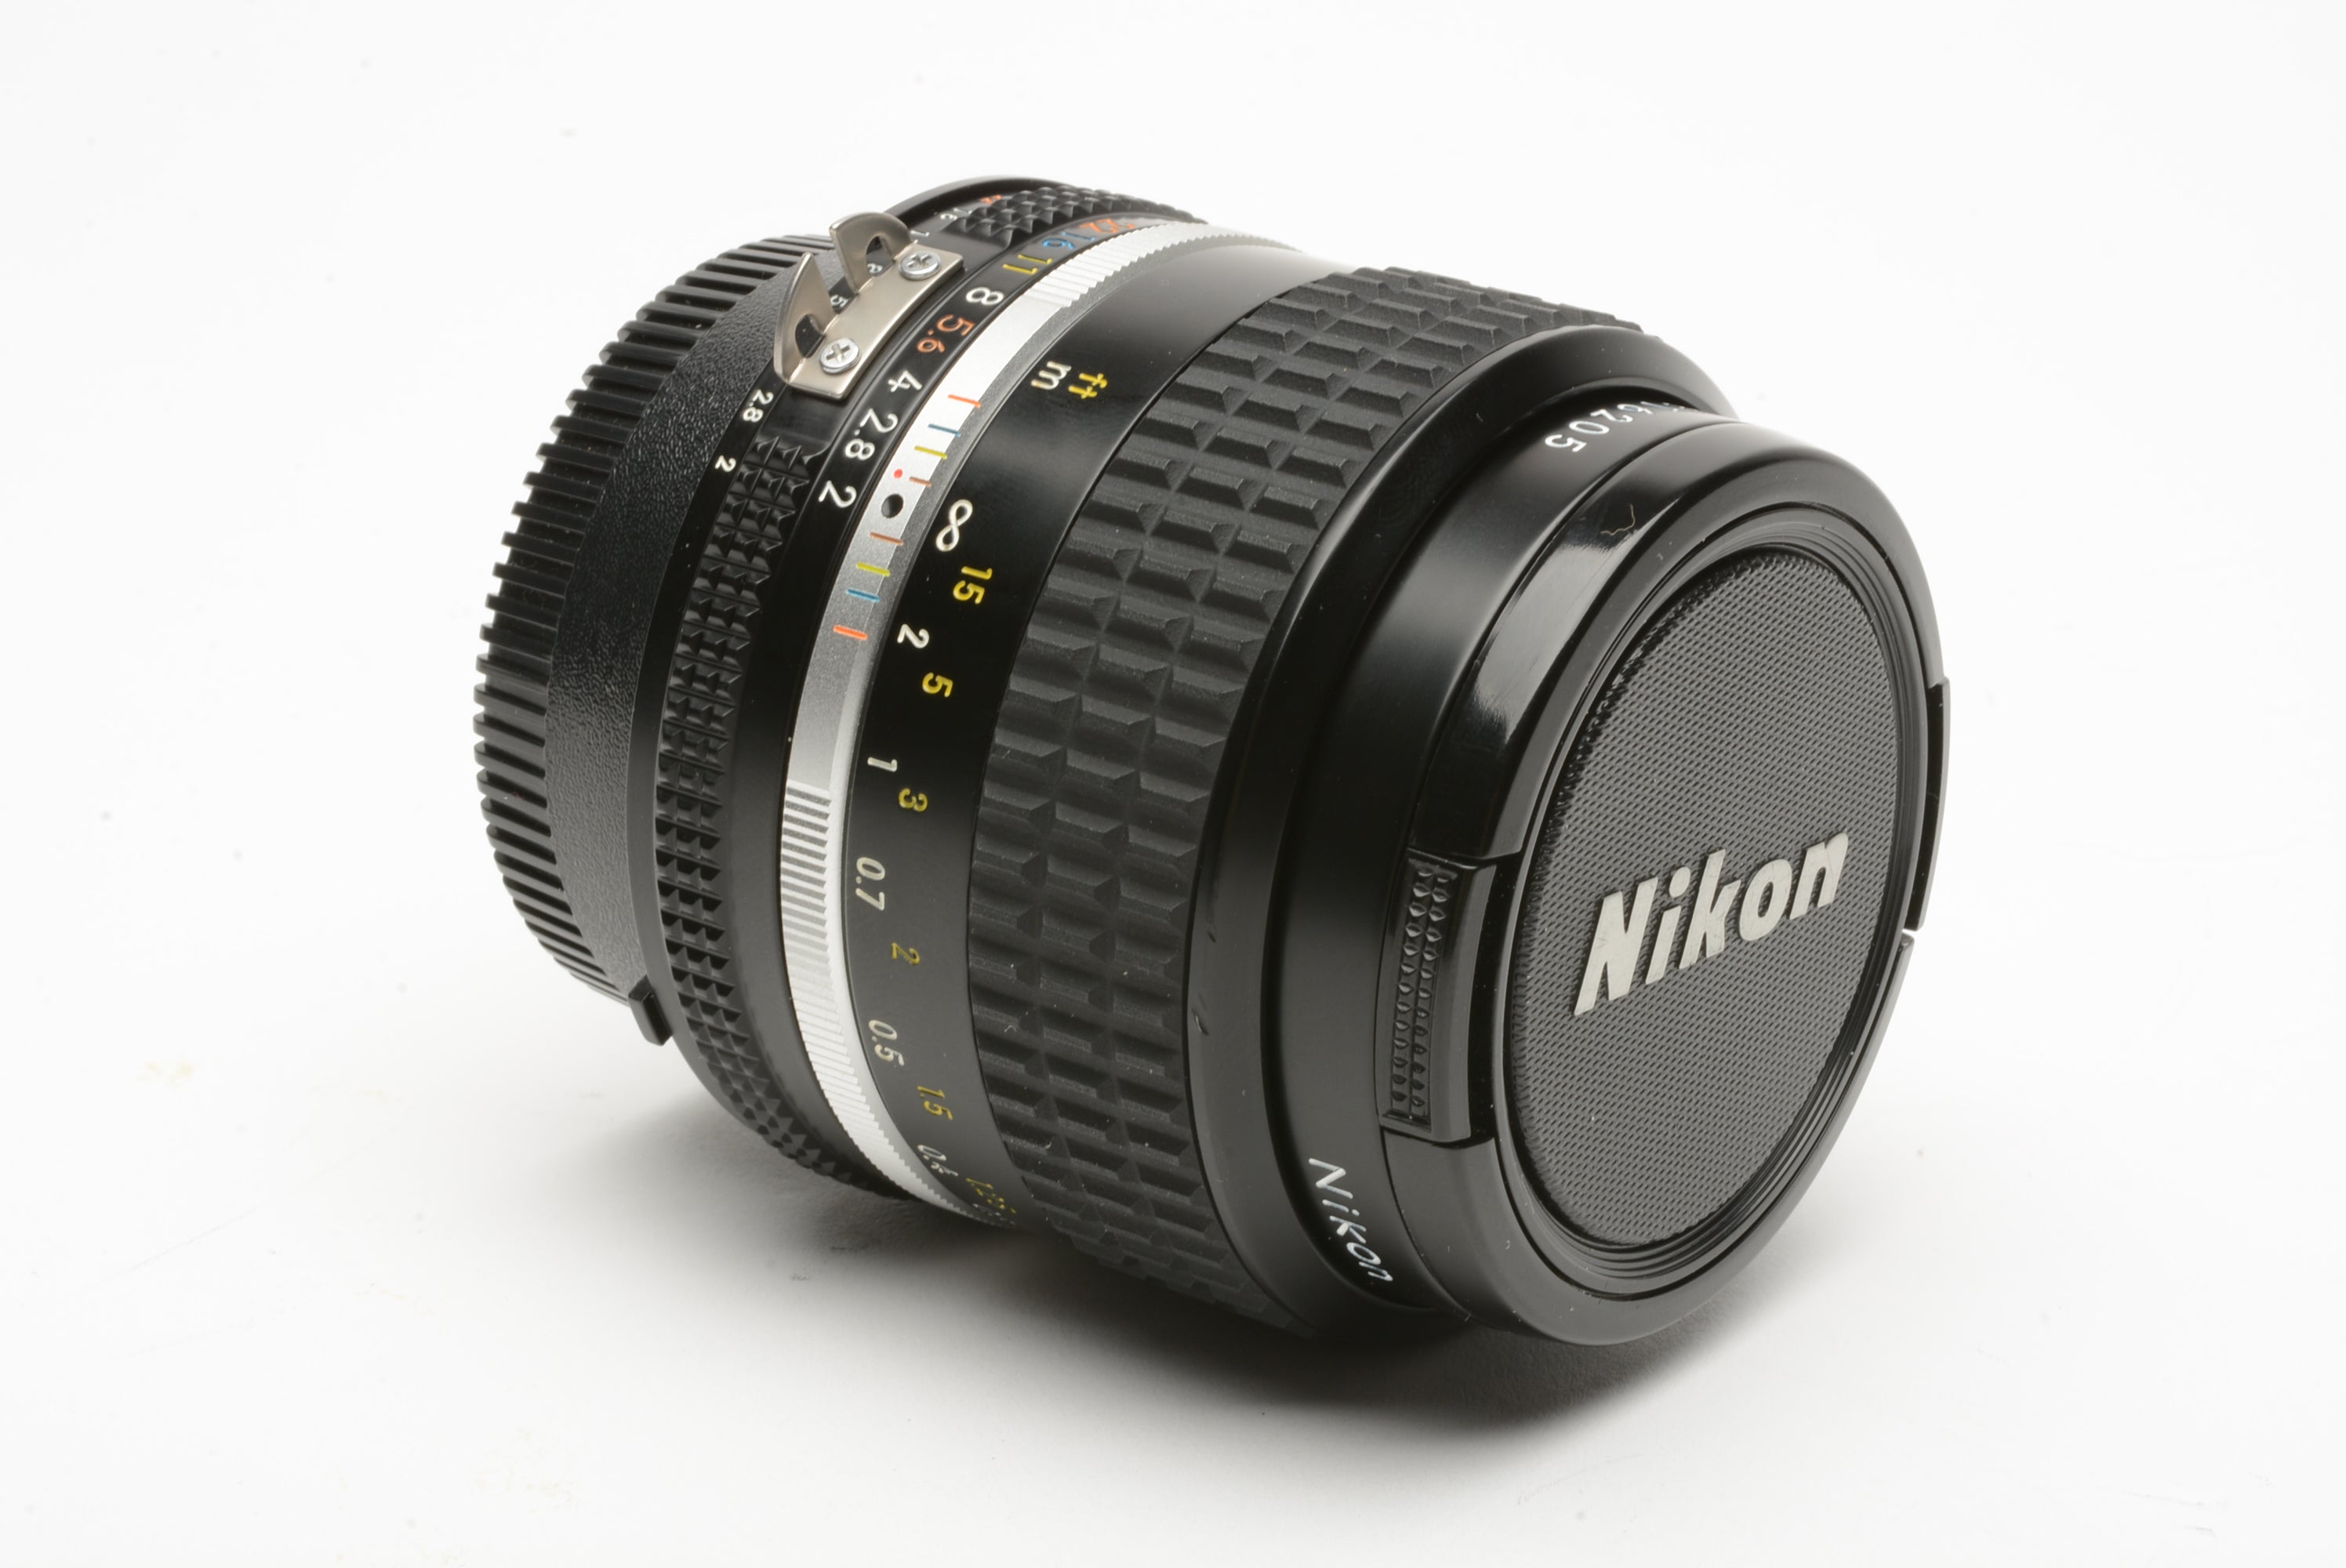 Nikon Nikkor 35mm F2 AI-S prime wide lens, Very clean and sharp